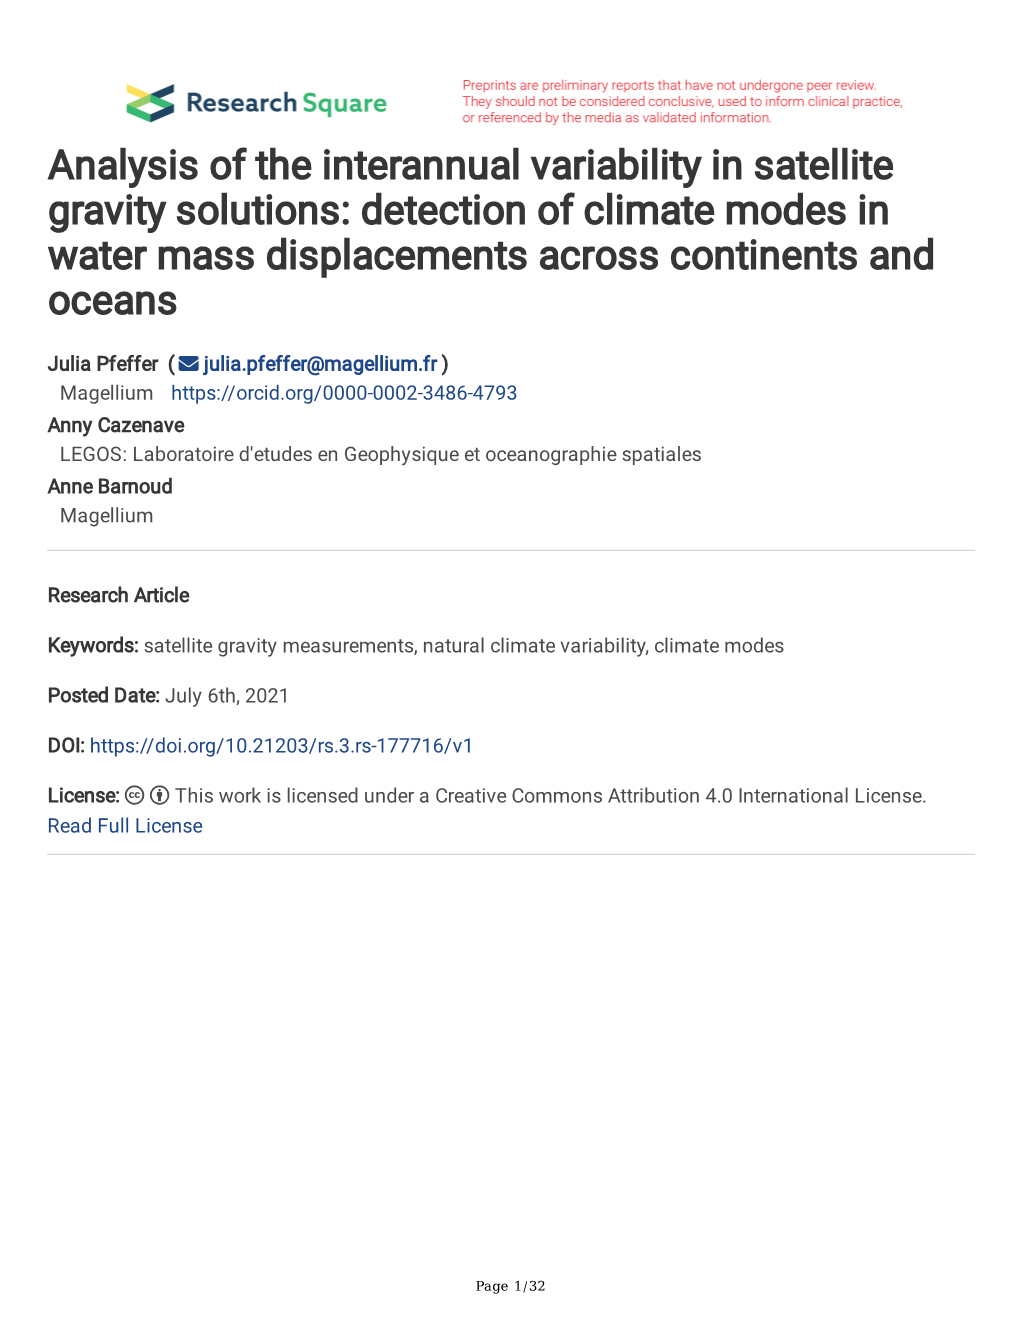 Analysis of the Interannual Variability in Satellite Gravity Solutions: Detection of Climate Modes in Water Mass Displacements Across Continents and Oceans